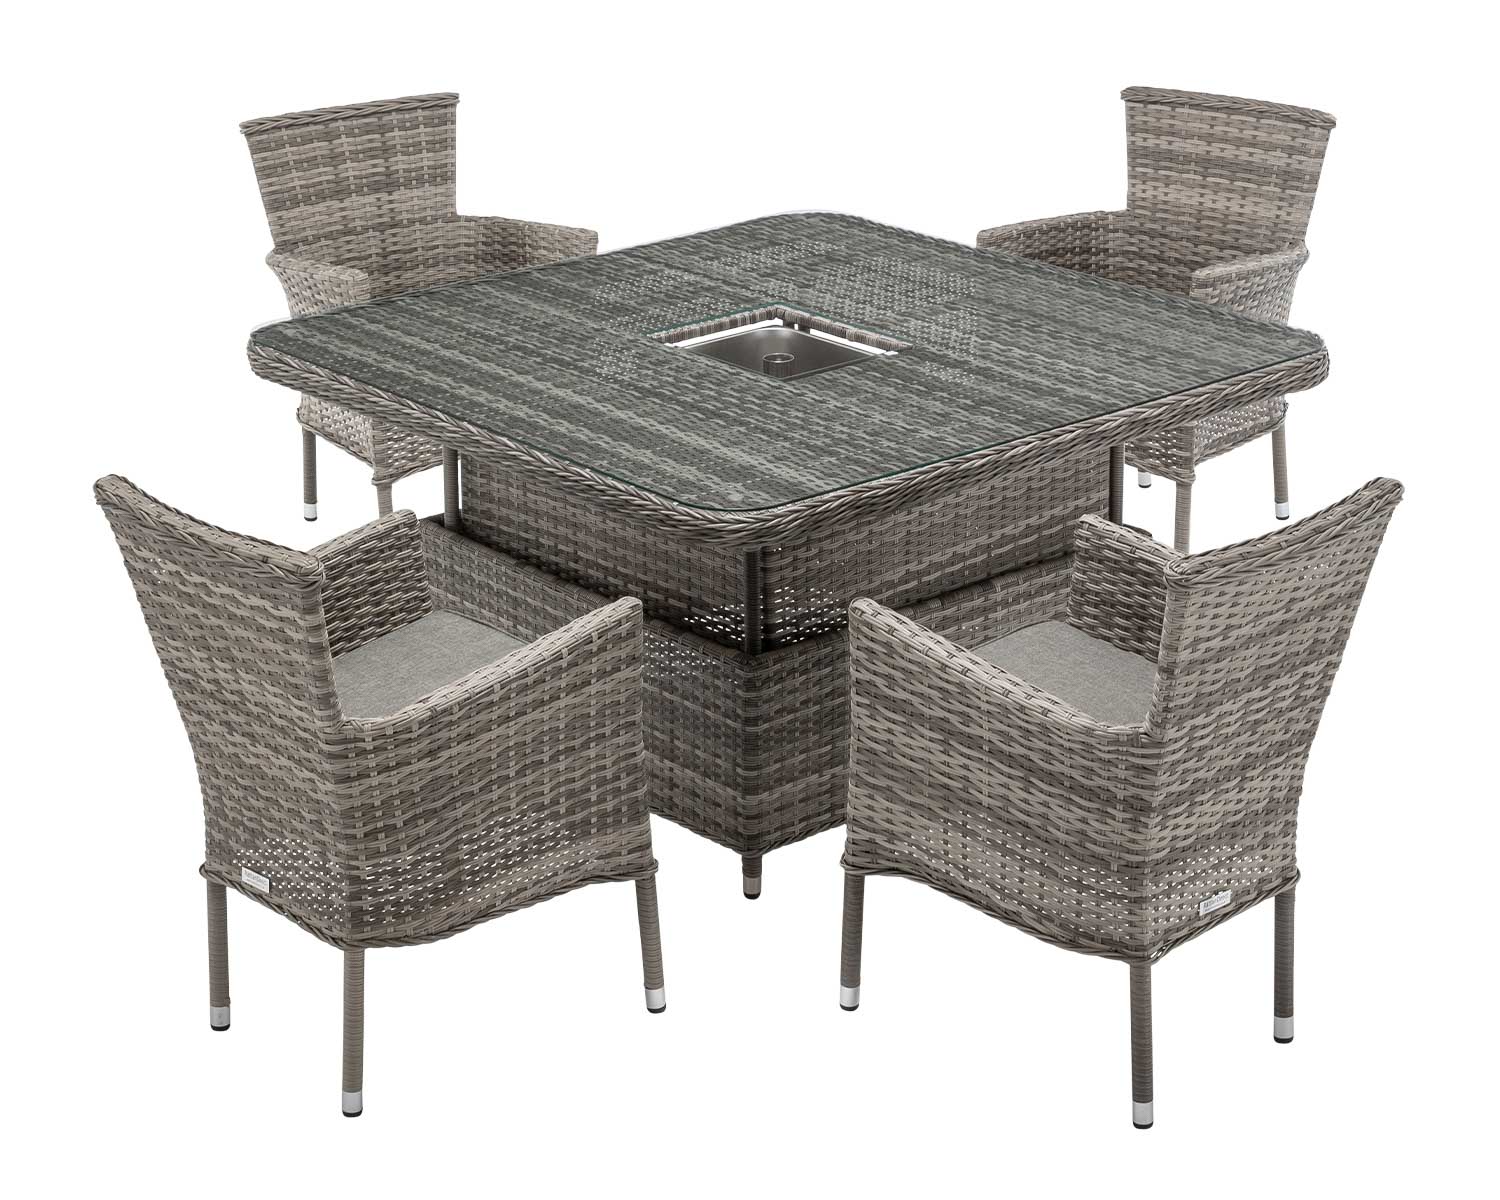 4 Seat Rattan Garden Dining Set With Square Table In Grey With Ice Bucket Cambridge Rattan Direct